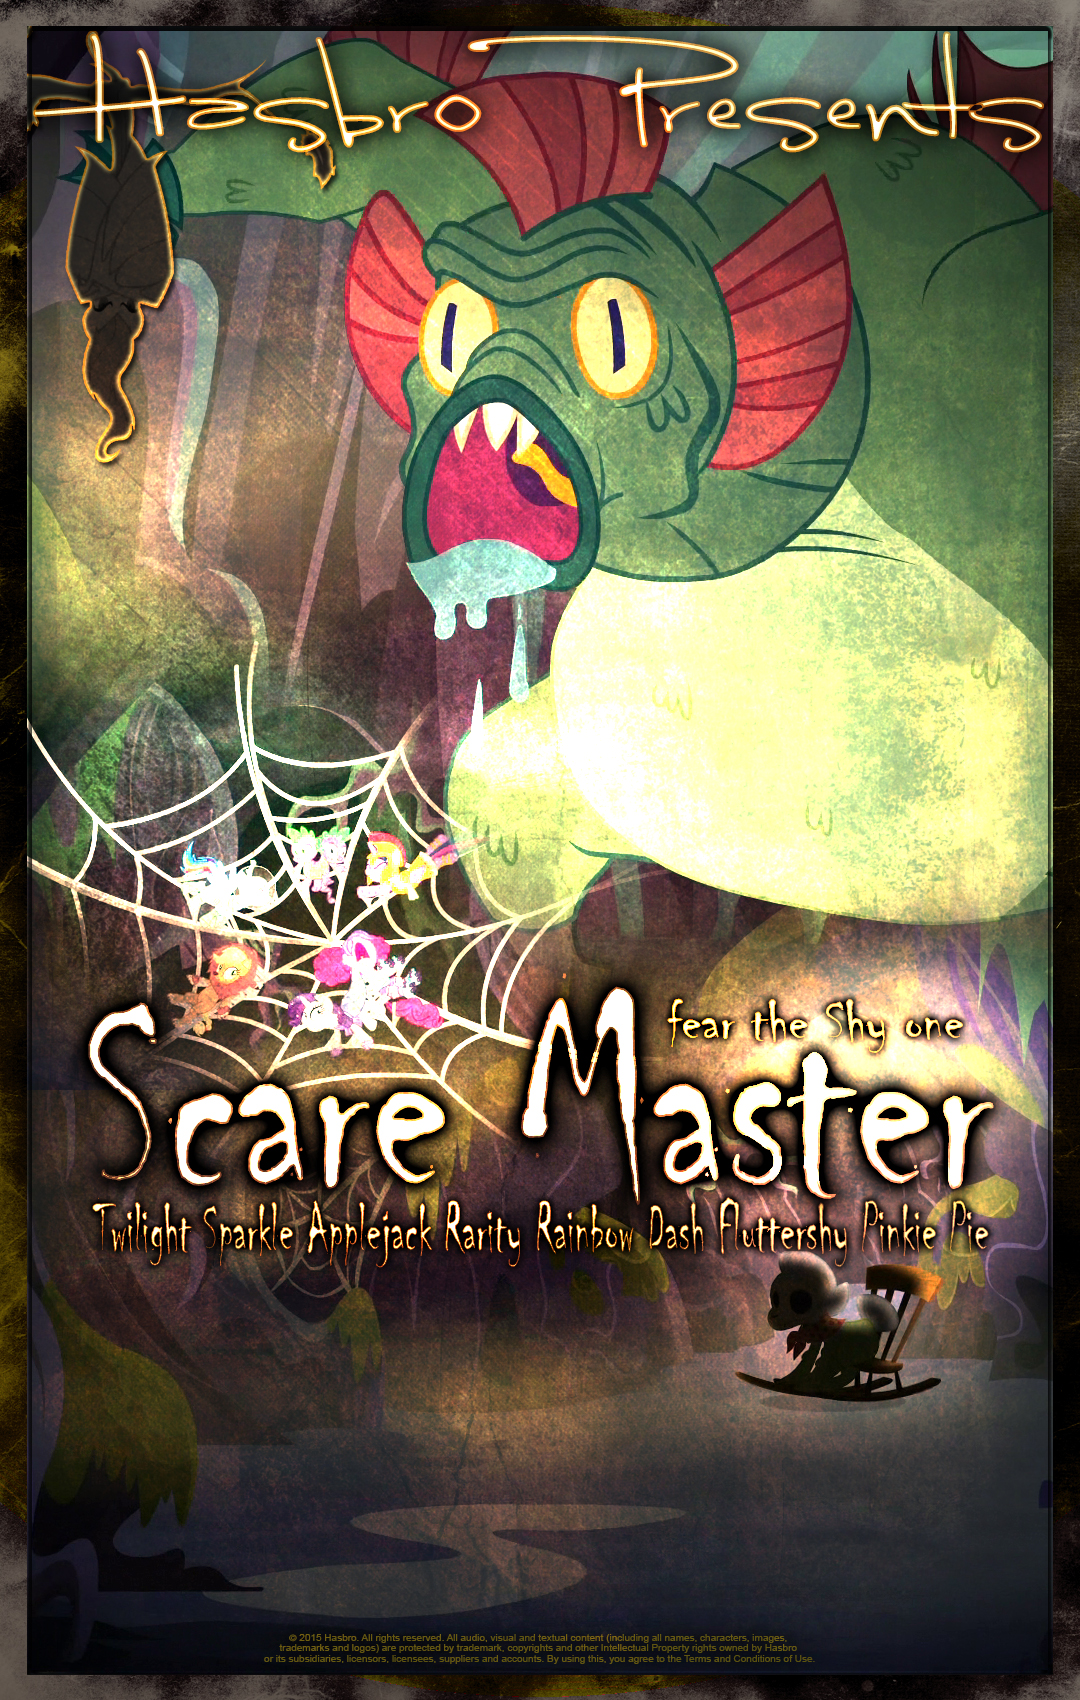 mlp___scare_master___movie_poster_by_pims1978-d9f4vm7.jpg